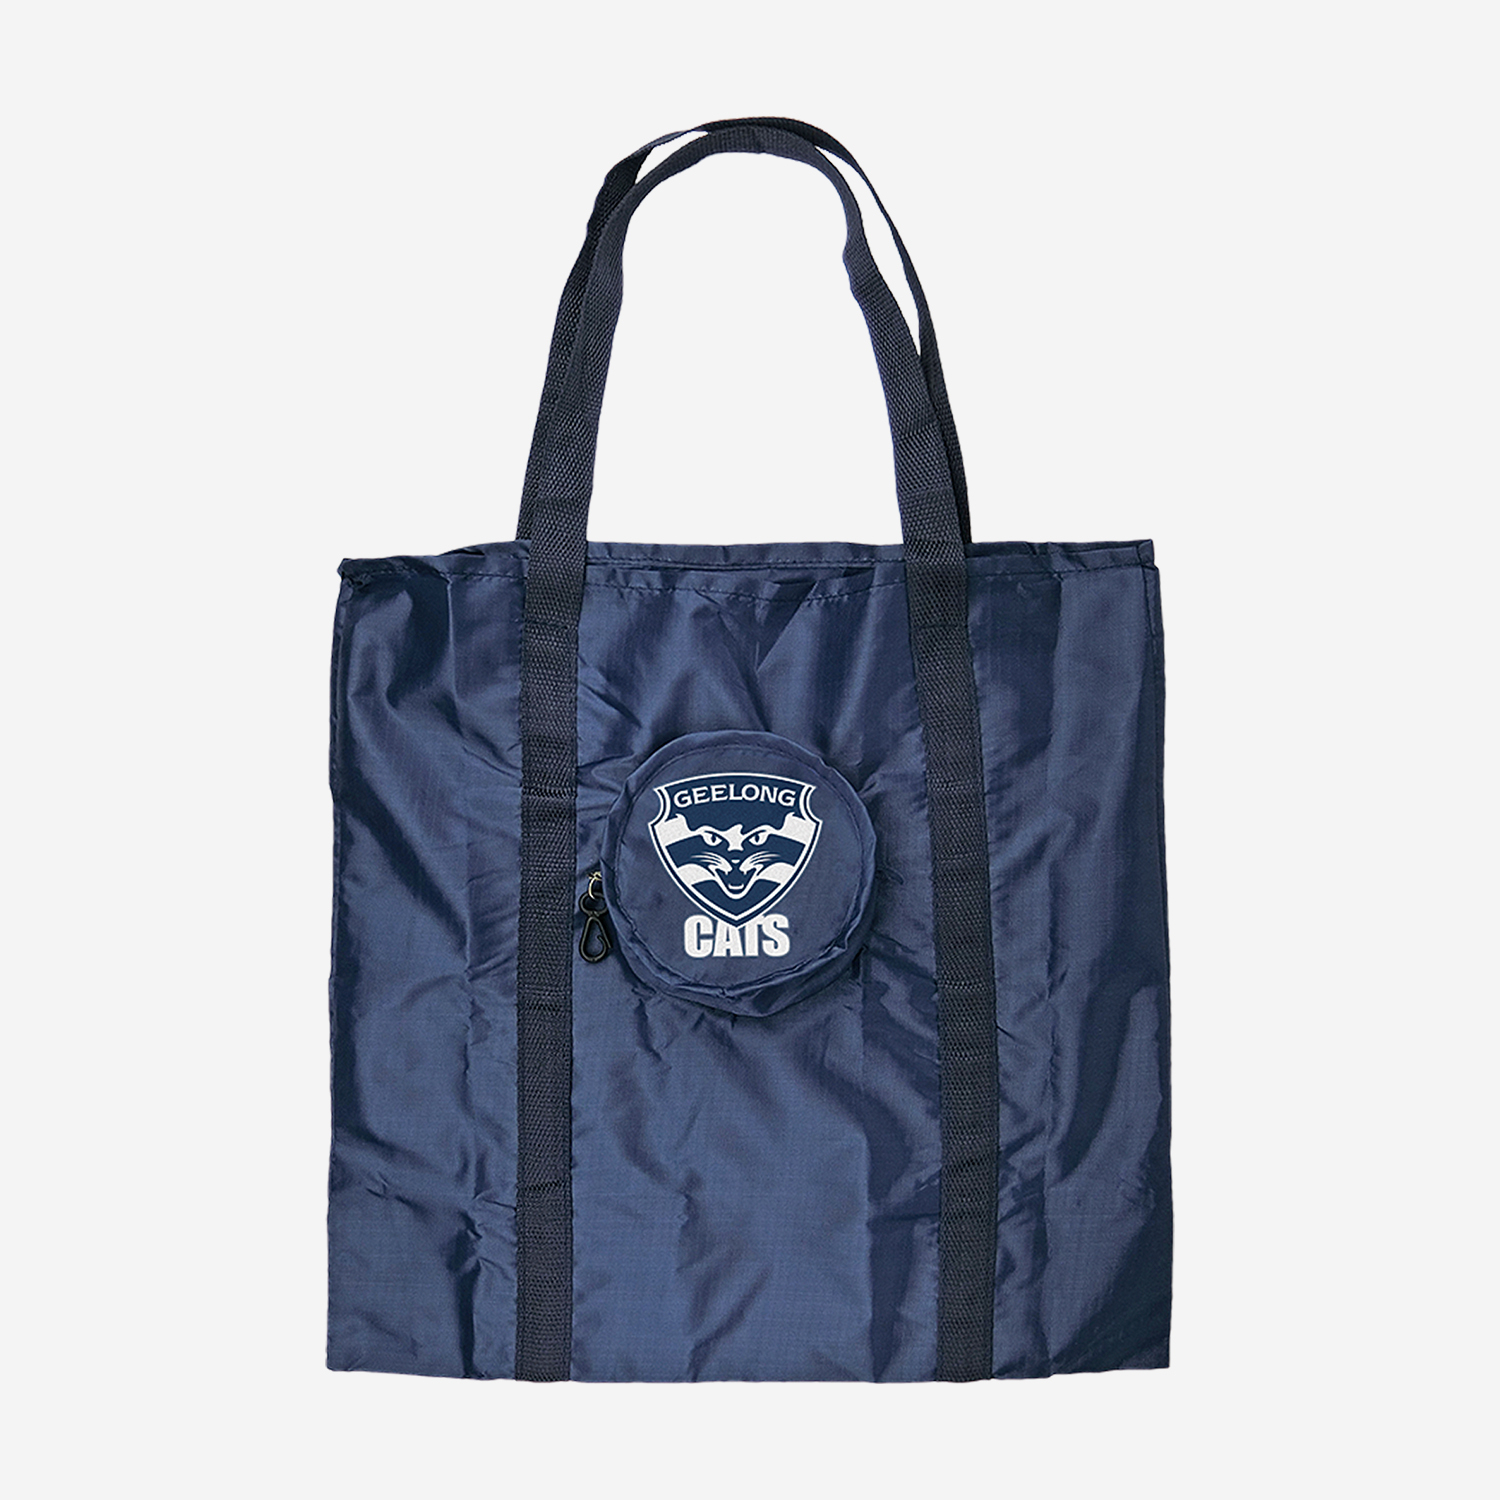 AFL Foldable Tote Bag Geelong Cats